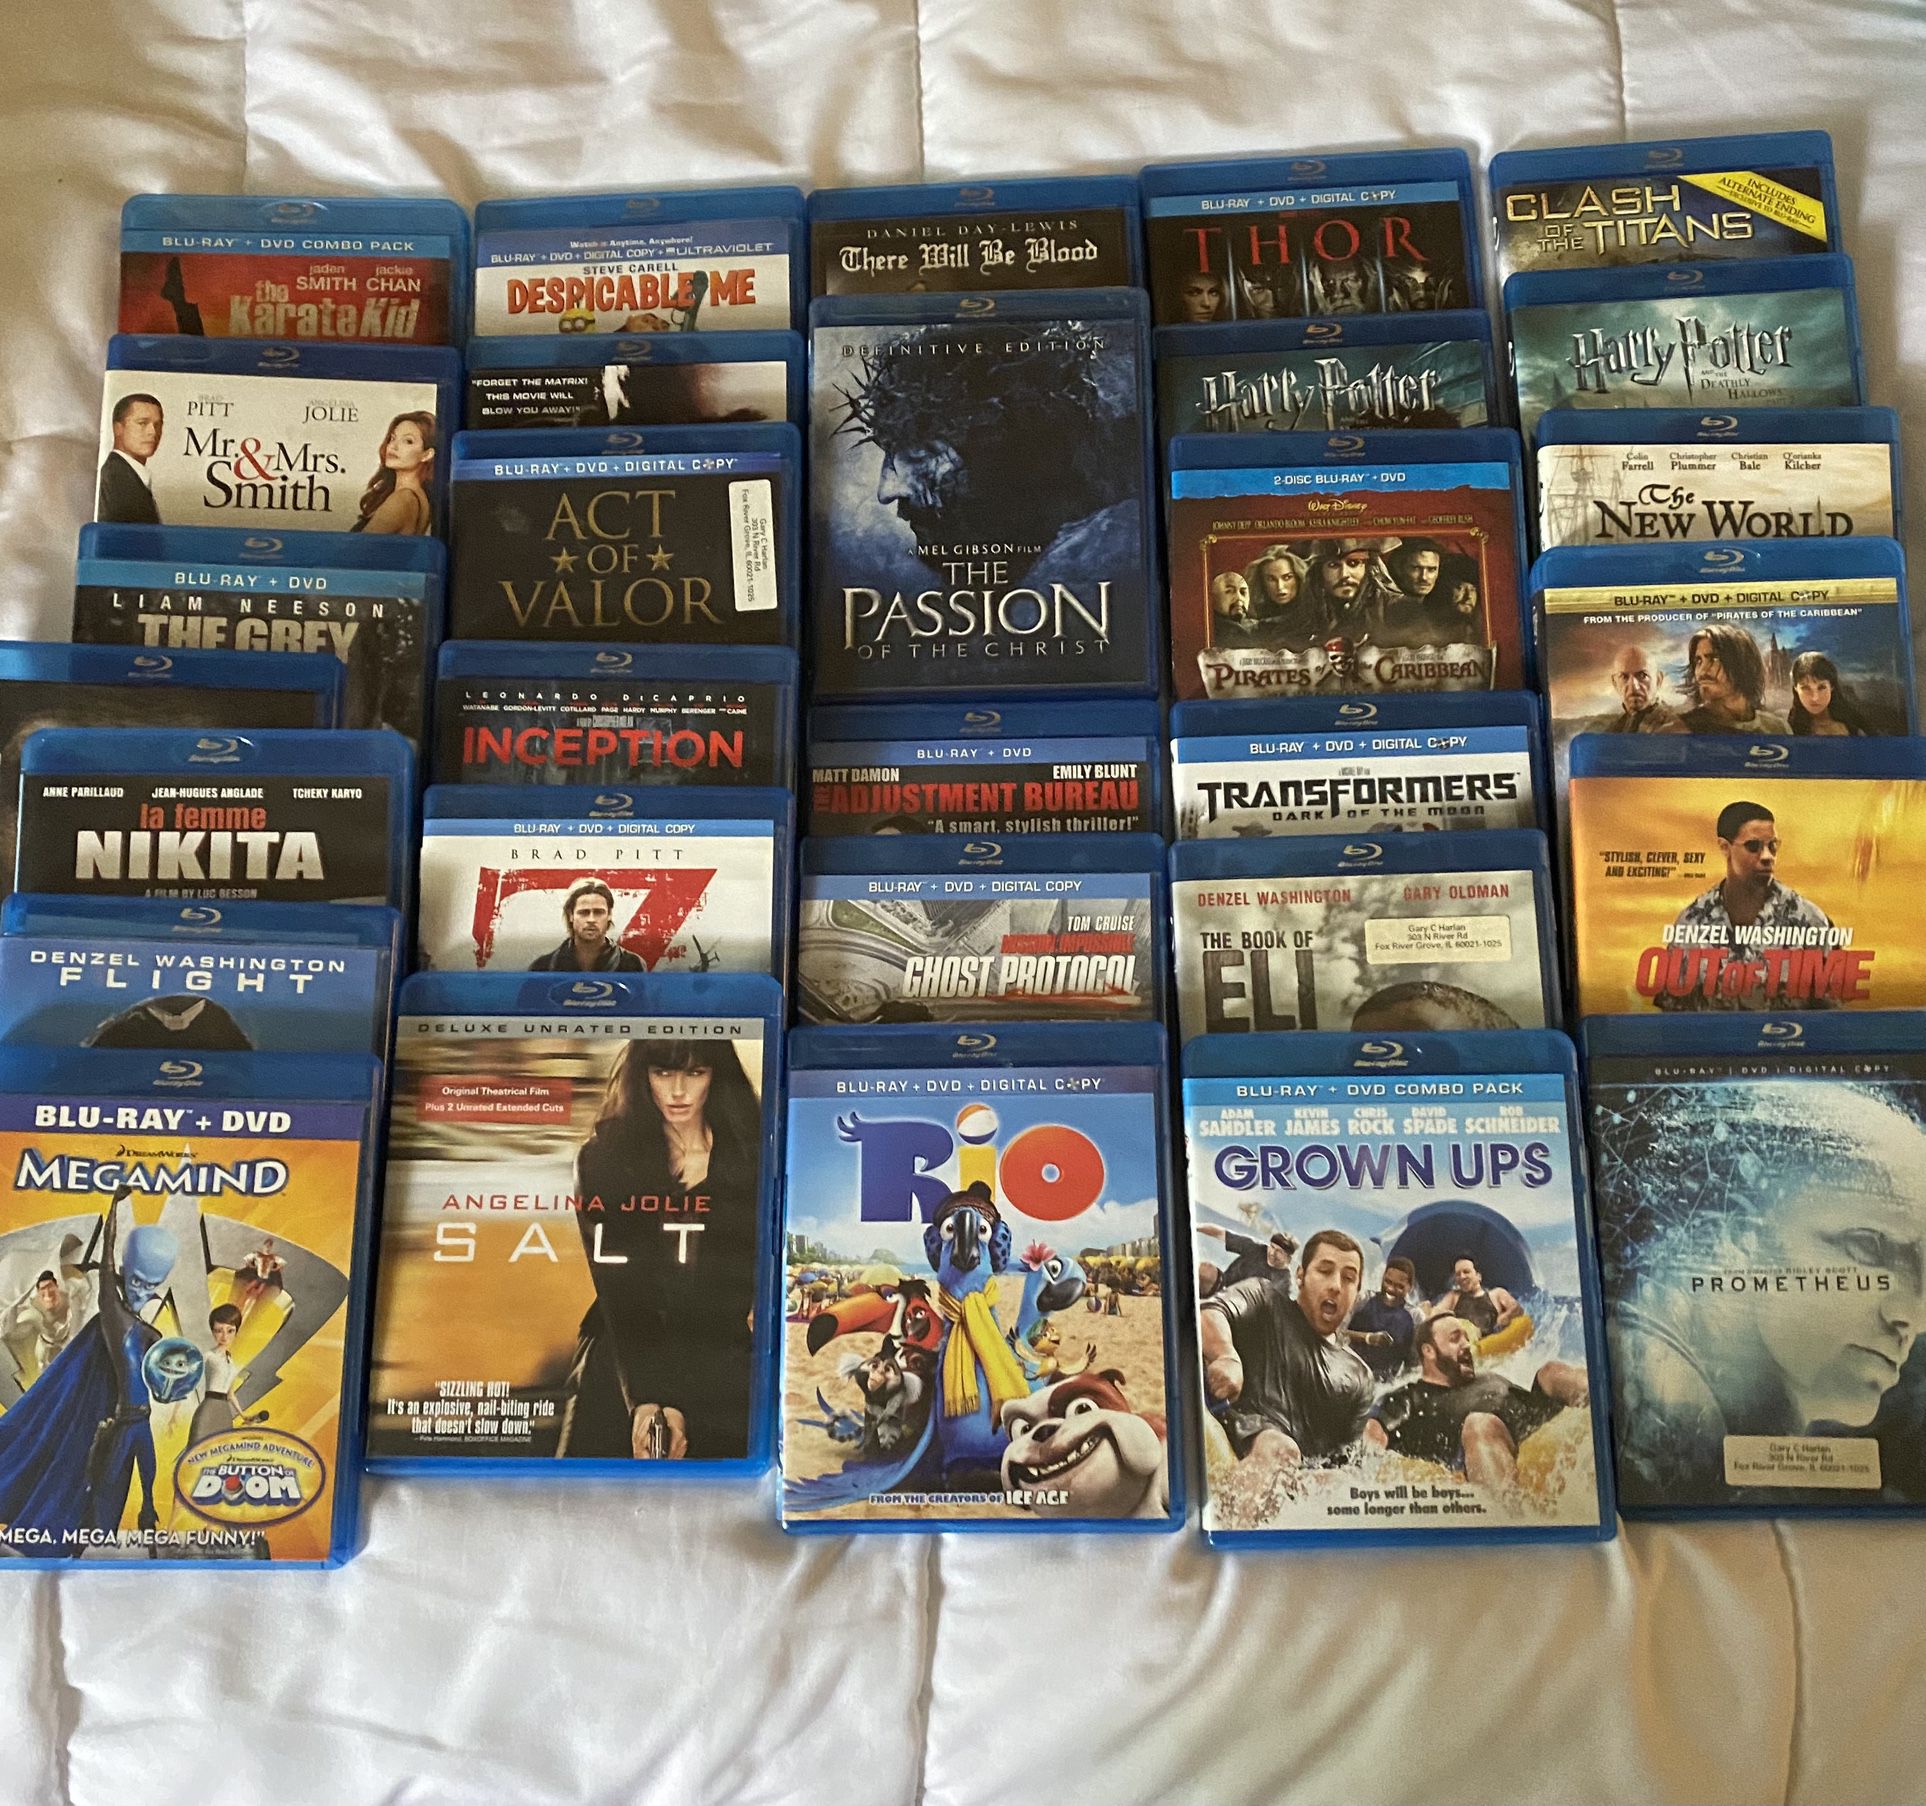 26Blu-Ray DVDs All Like New $3.00 Each Or Four For 10.00  $60.00 For All  